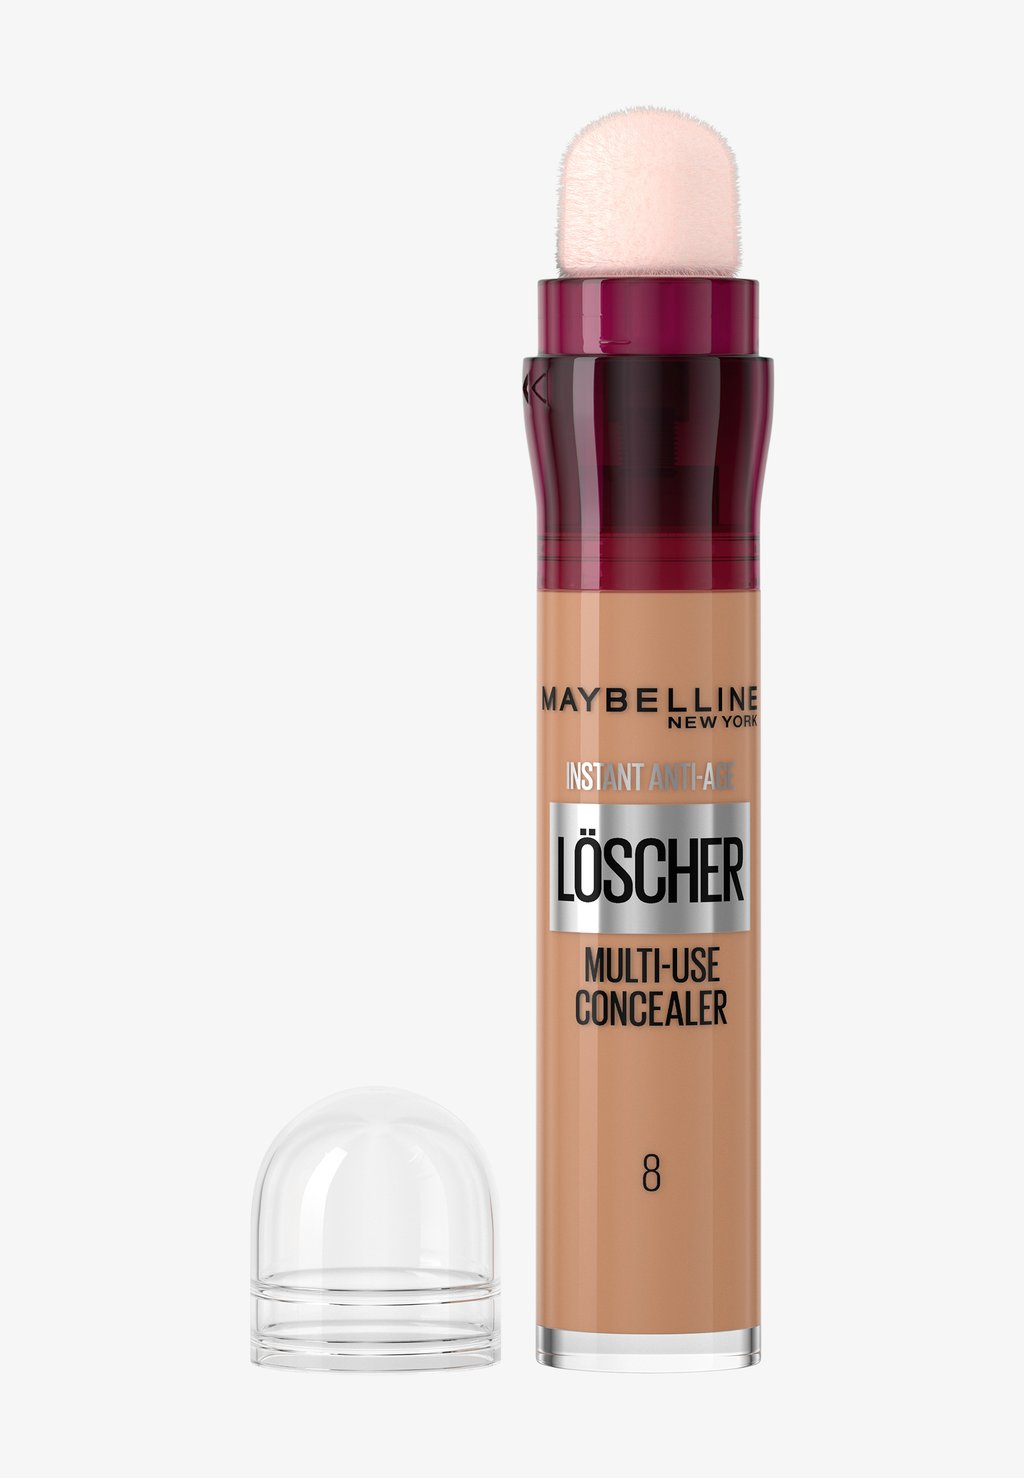 Консилер INSTANT CONCEALER Maybelline New York, цвет 08 buff maybelline new york concealer instant age rewind 08 buff